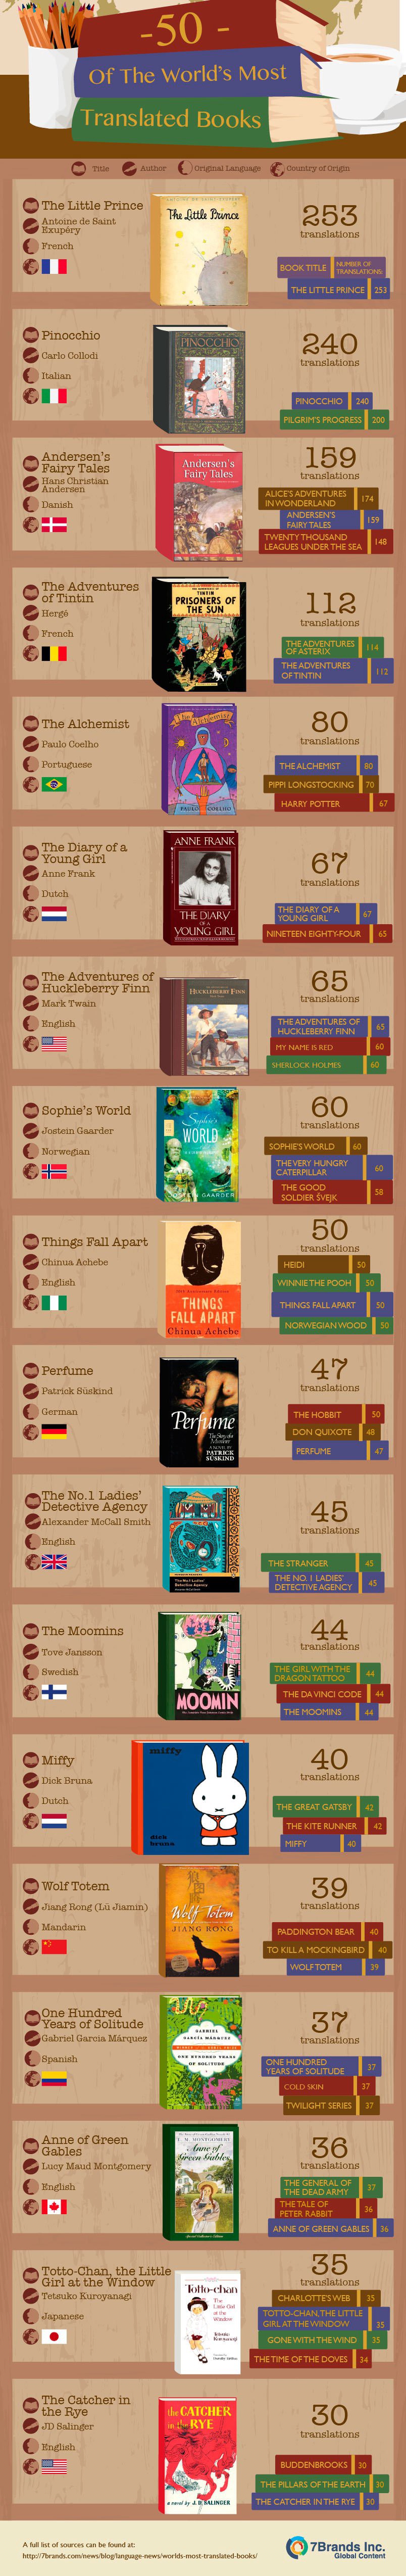 infographic translated books